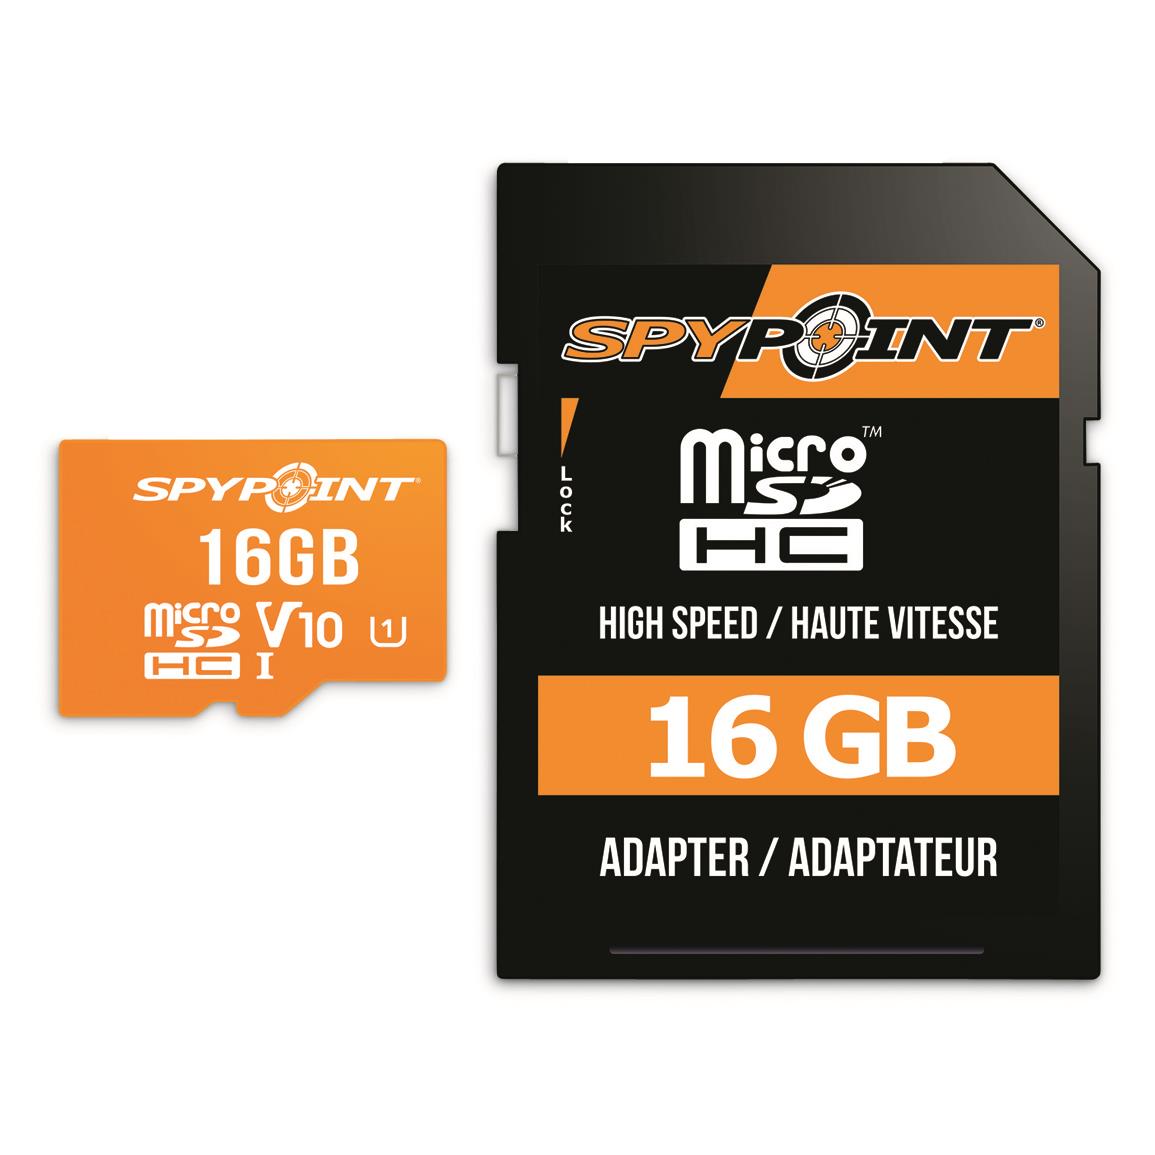 SPYPOINT 16GB Micro SDHC Card and Adapter